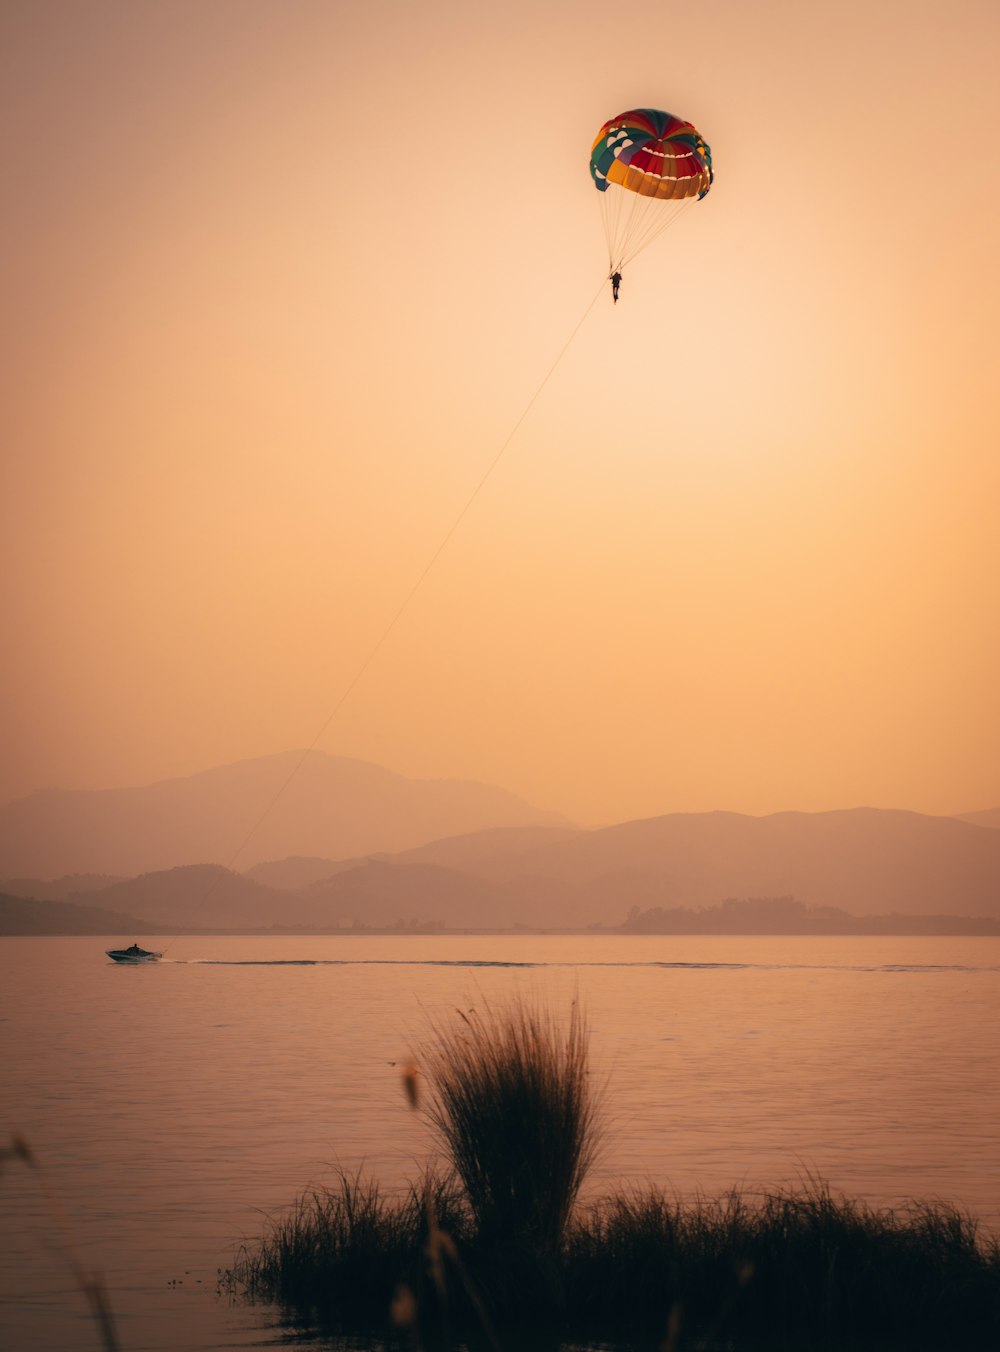 person on parachute over the sea during daytime